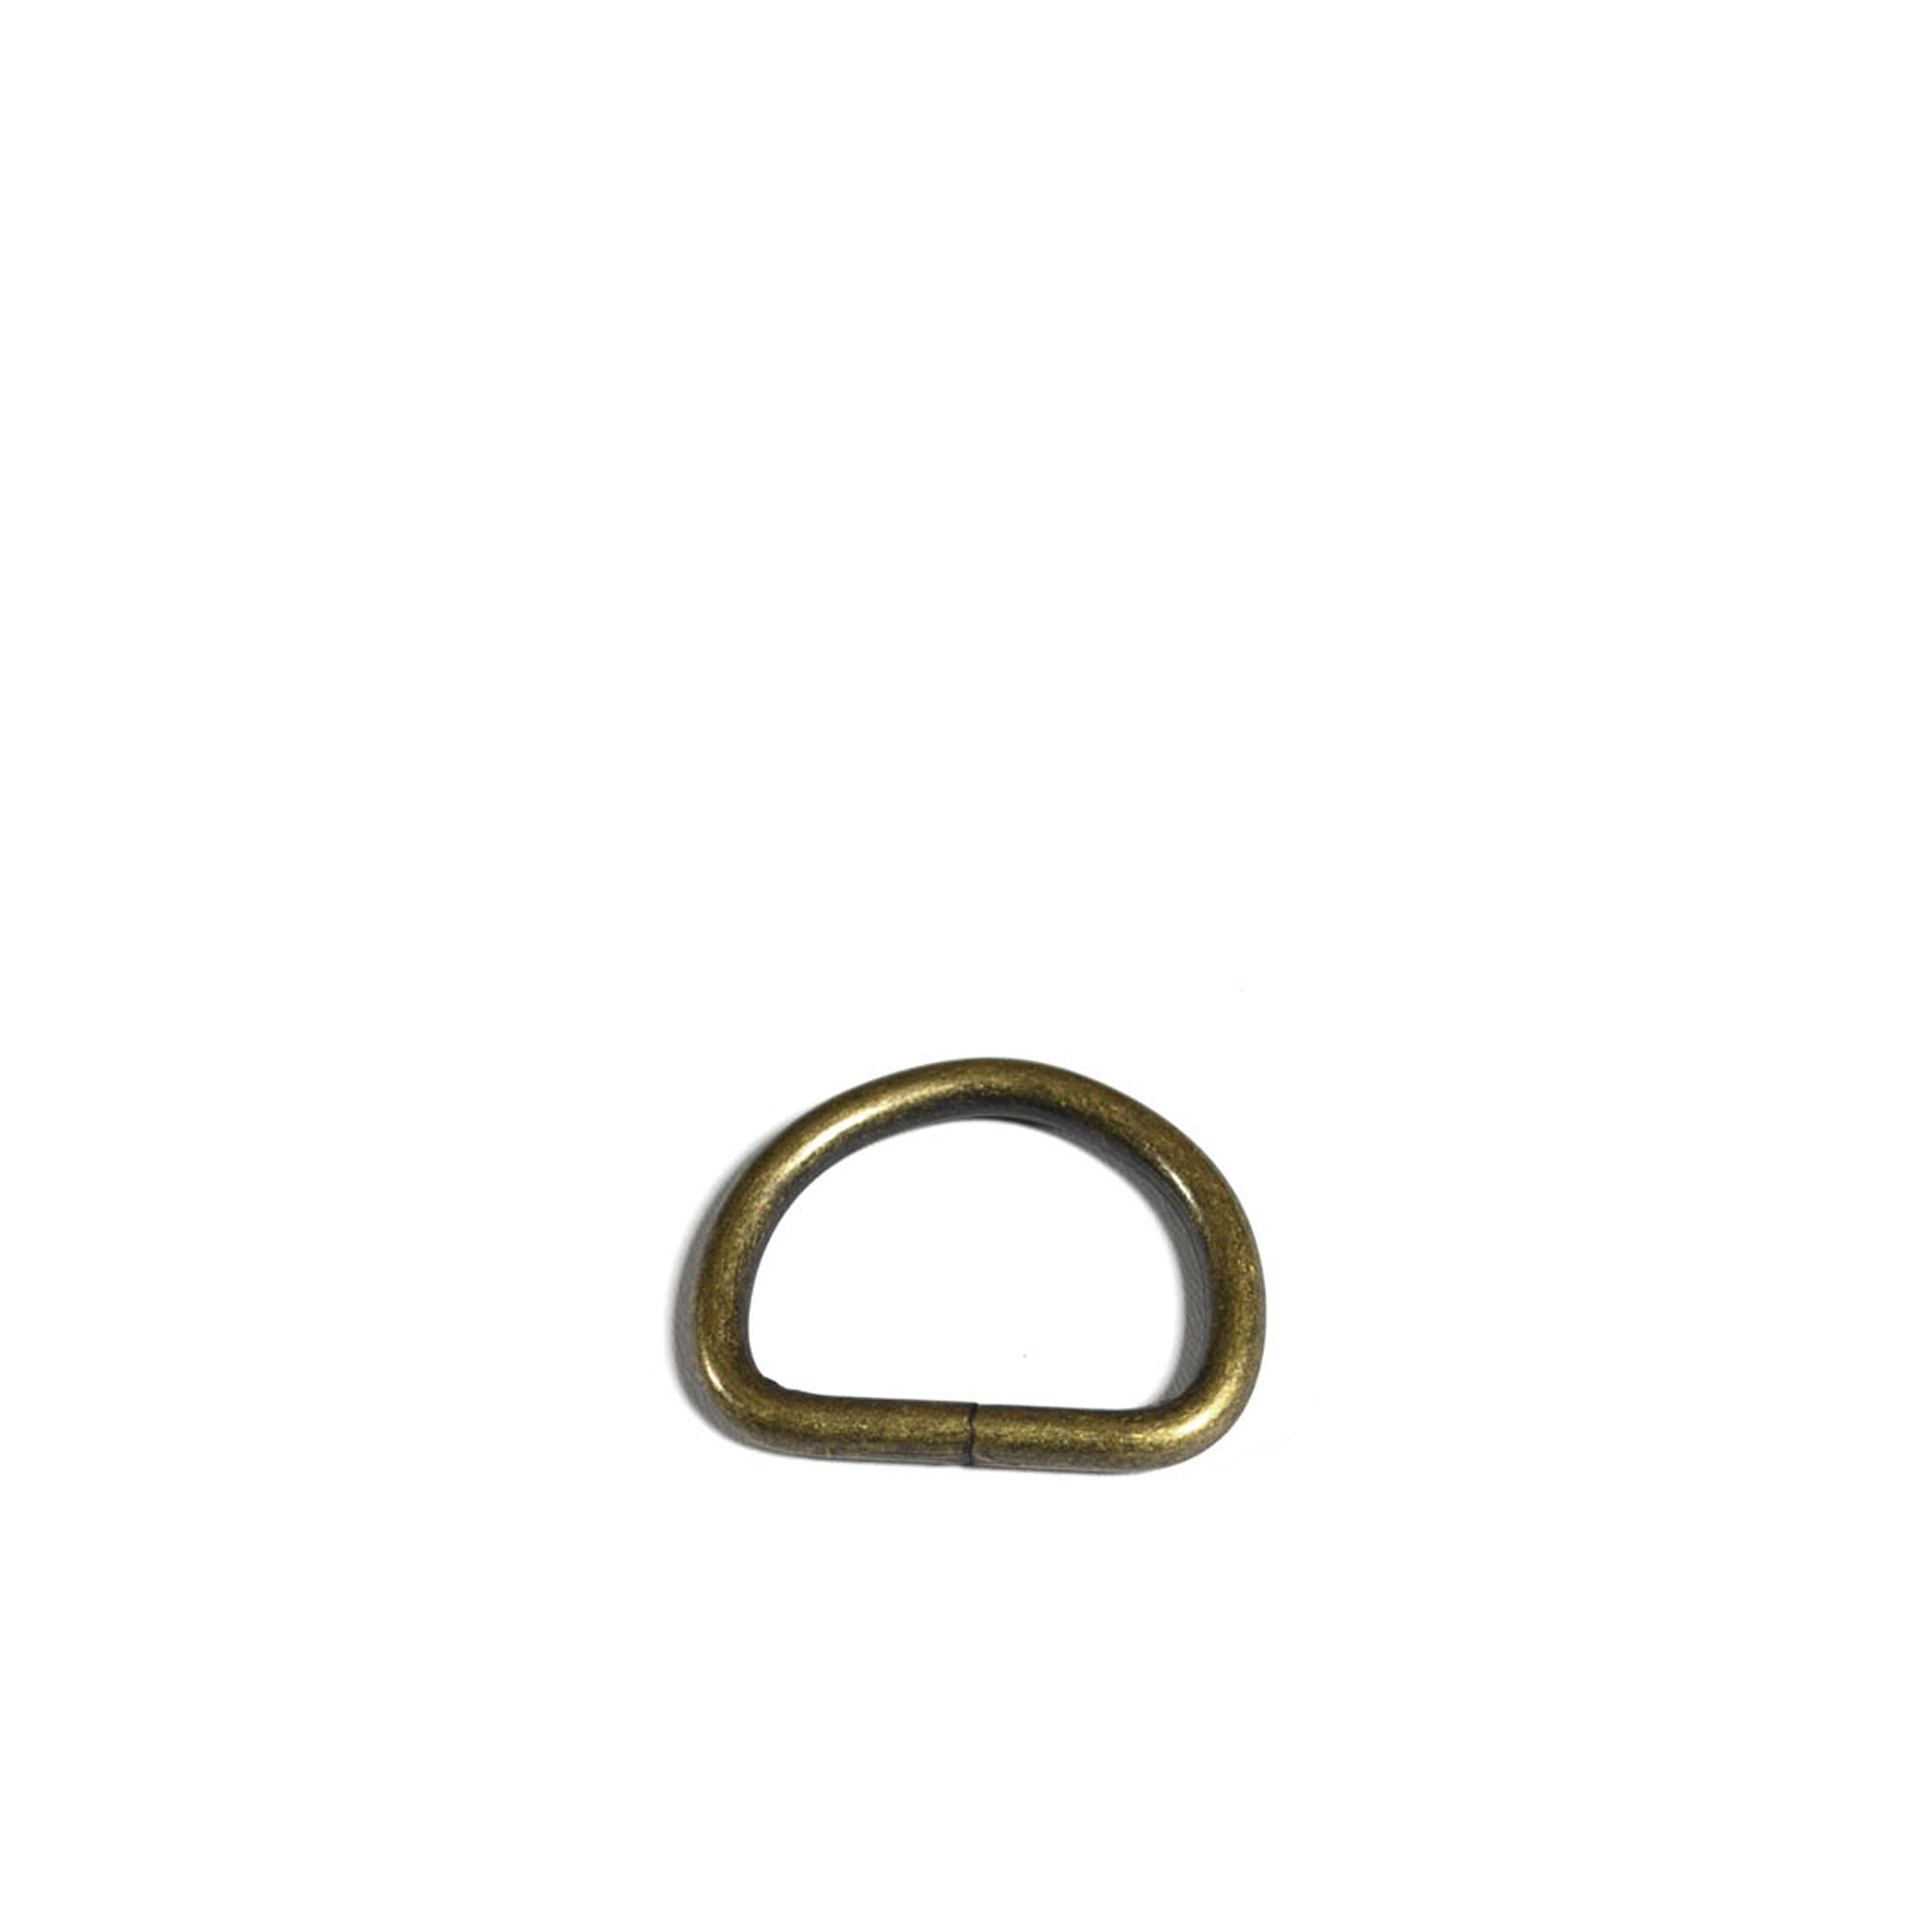 32mm Antique Brass Dee Ring from Identity Leathercraft